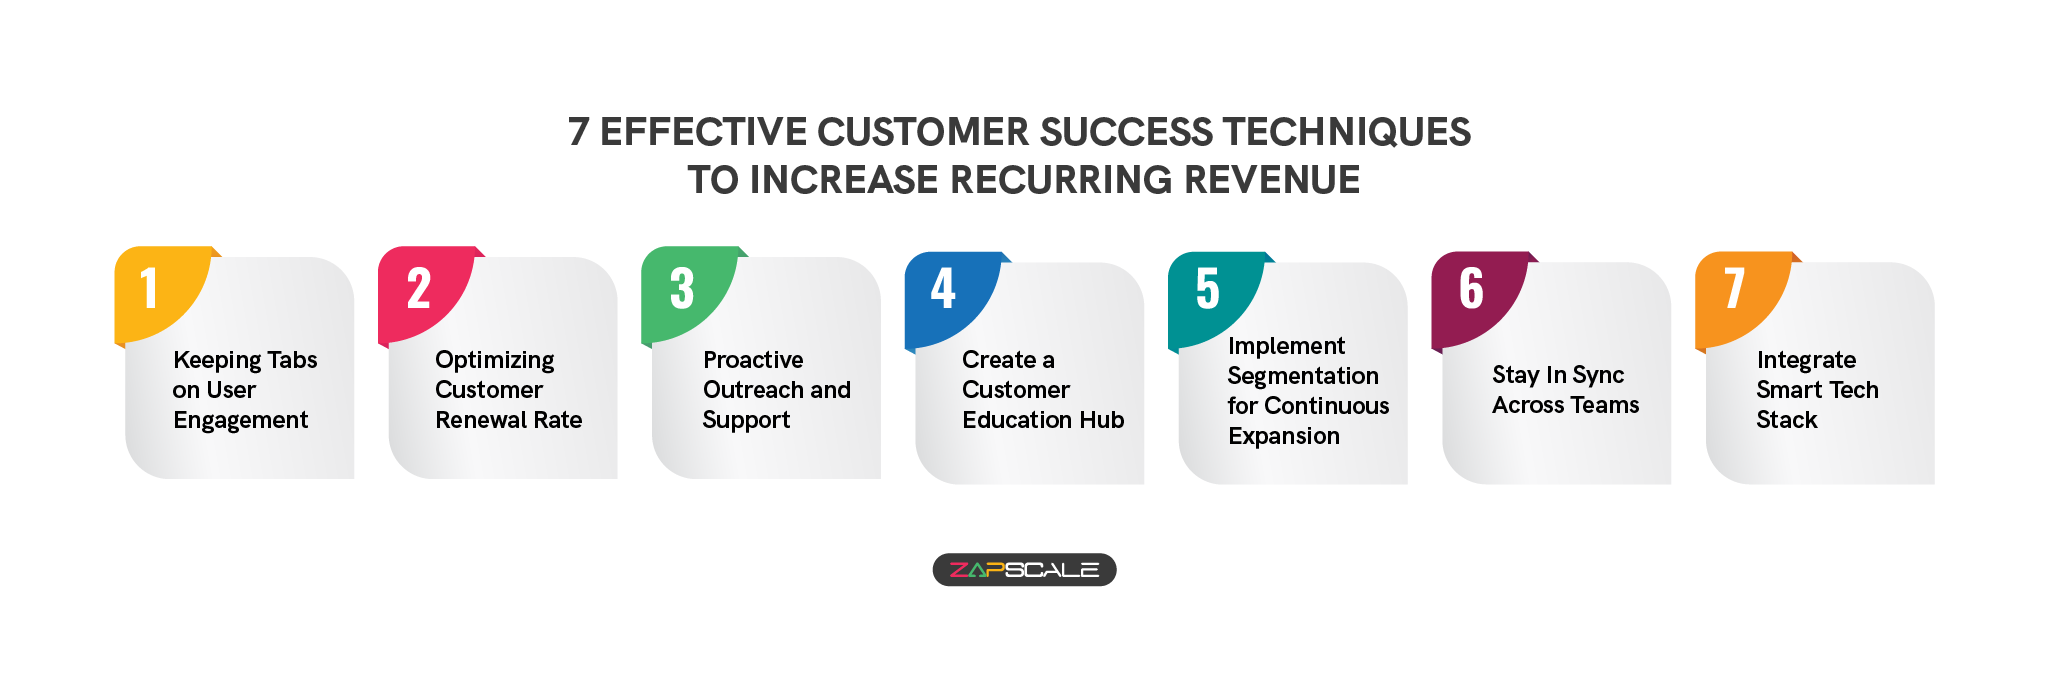 7 effective customer success techniques to increase recurring revenue